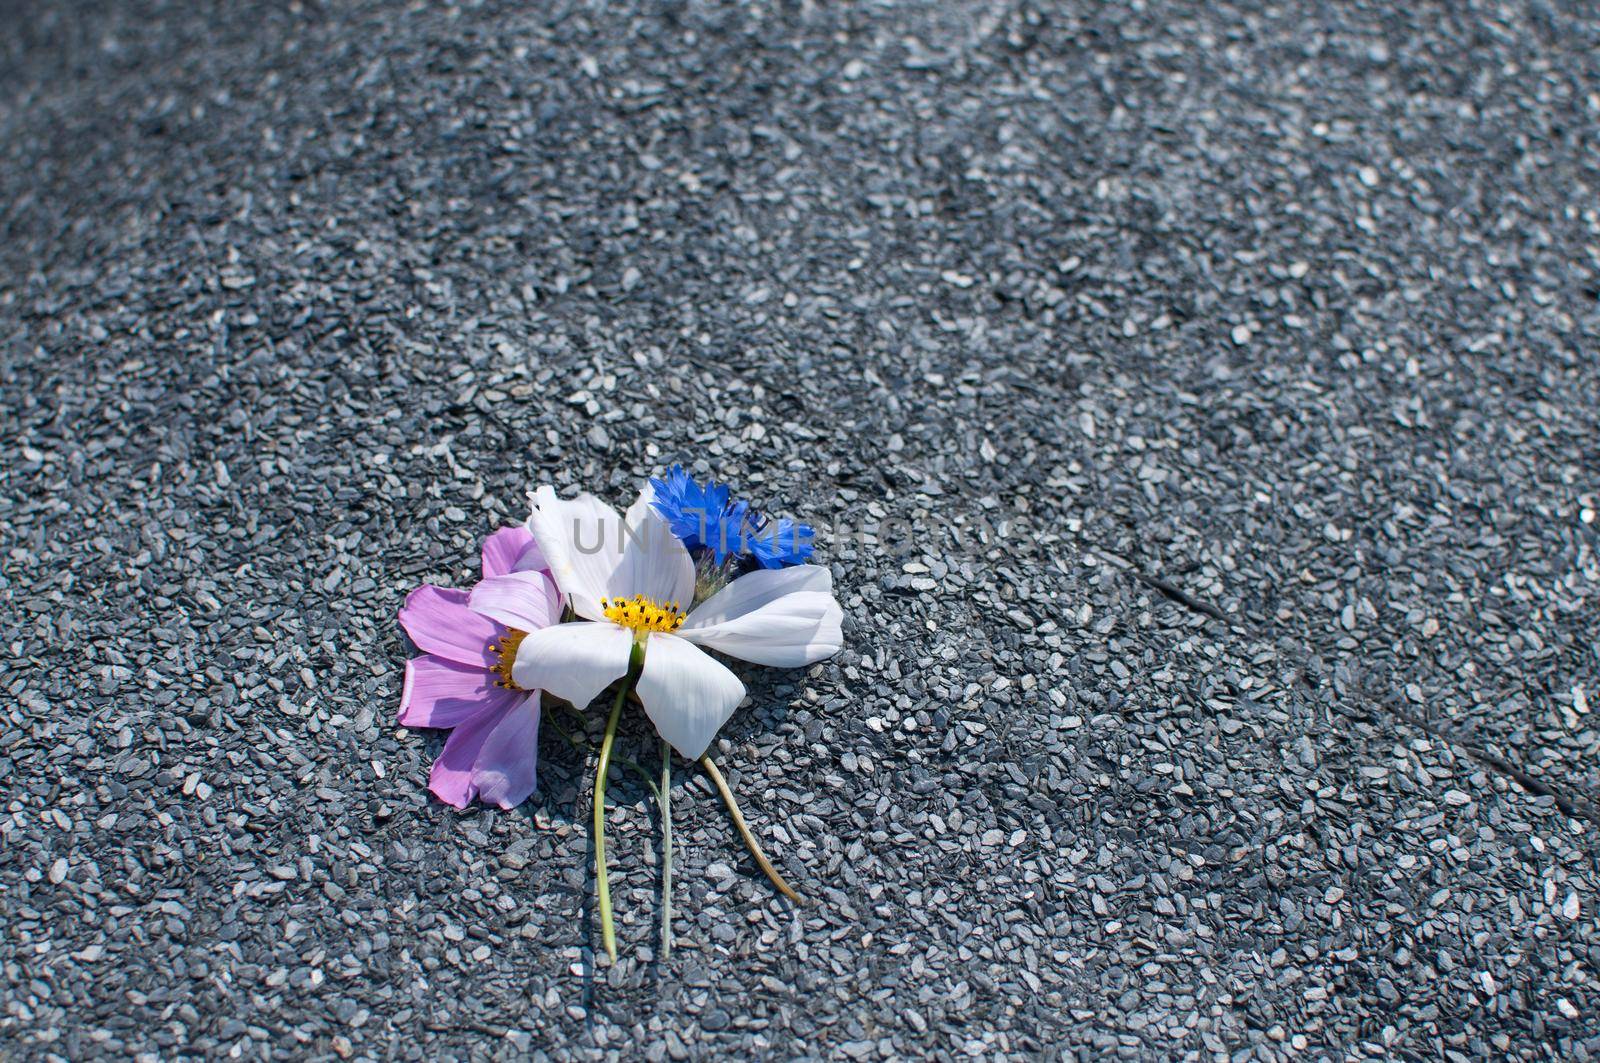 some little flowers lies on the pavement.